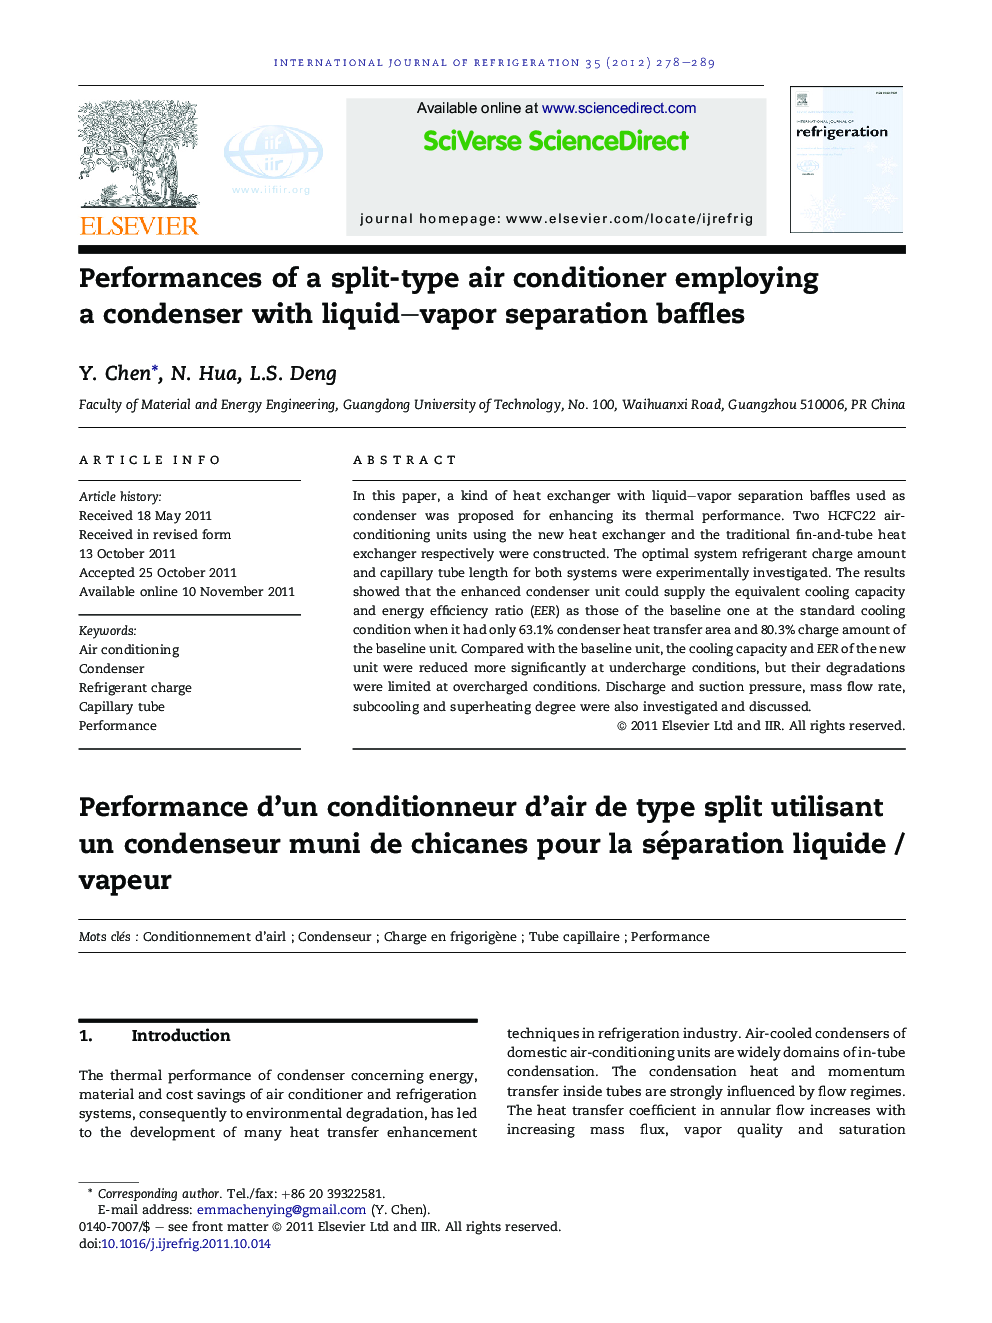 Performances of a split-type air conditioner employing a condenser with liquid–vapor separation baffles